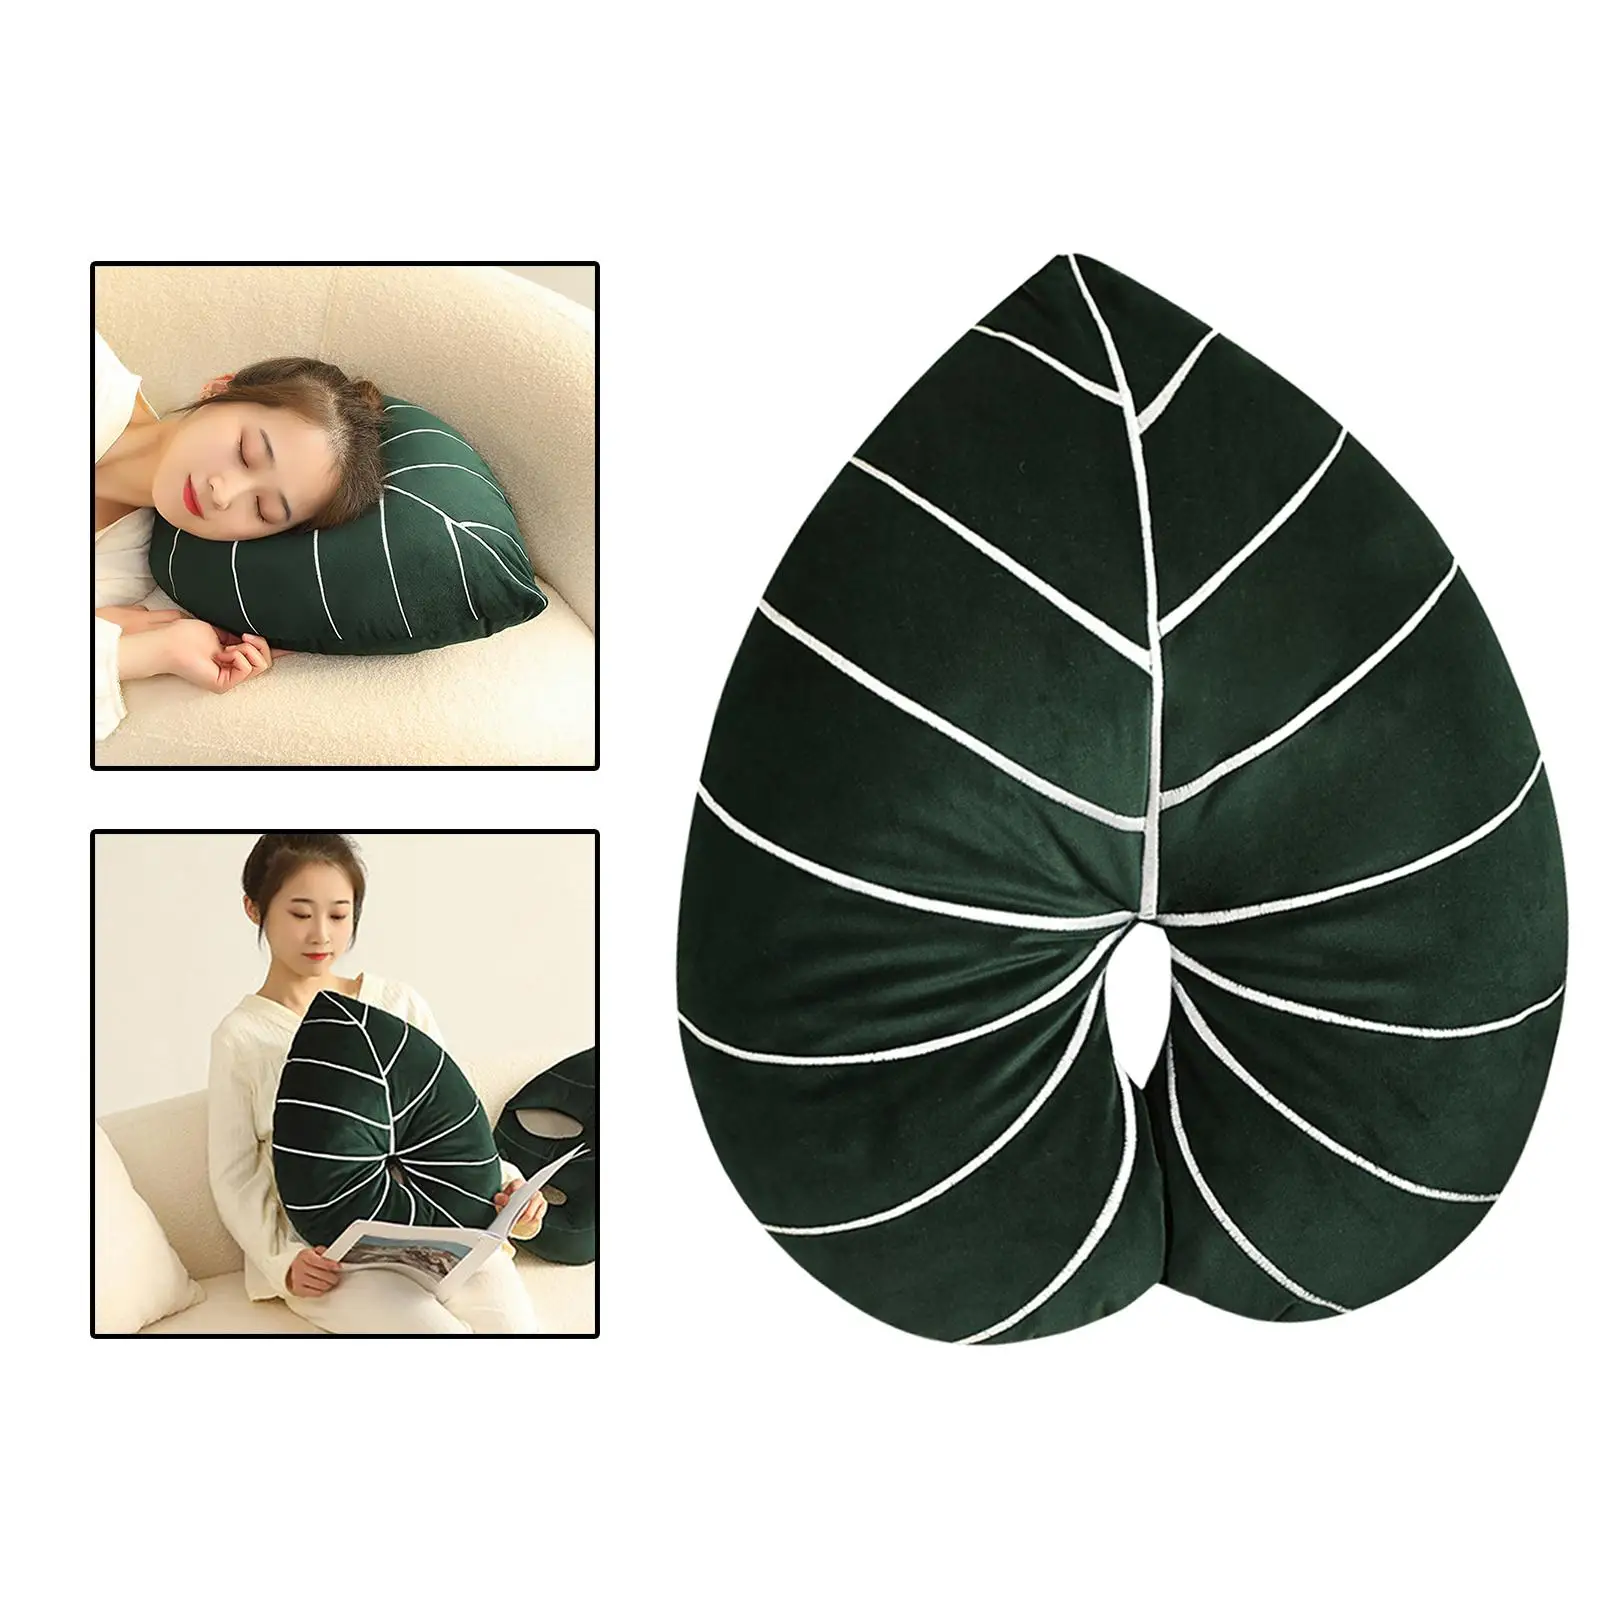  Leaf Shaped Throw  Decorative Filled  for  Nature Room Decor